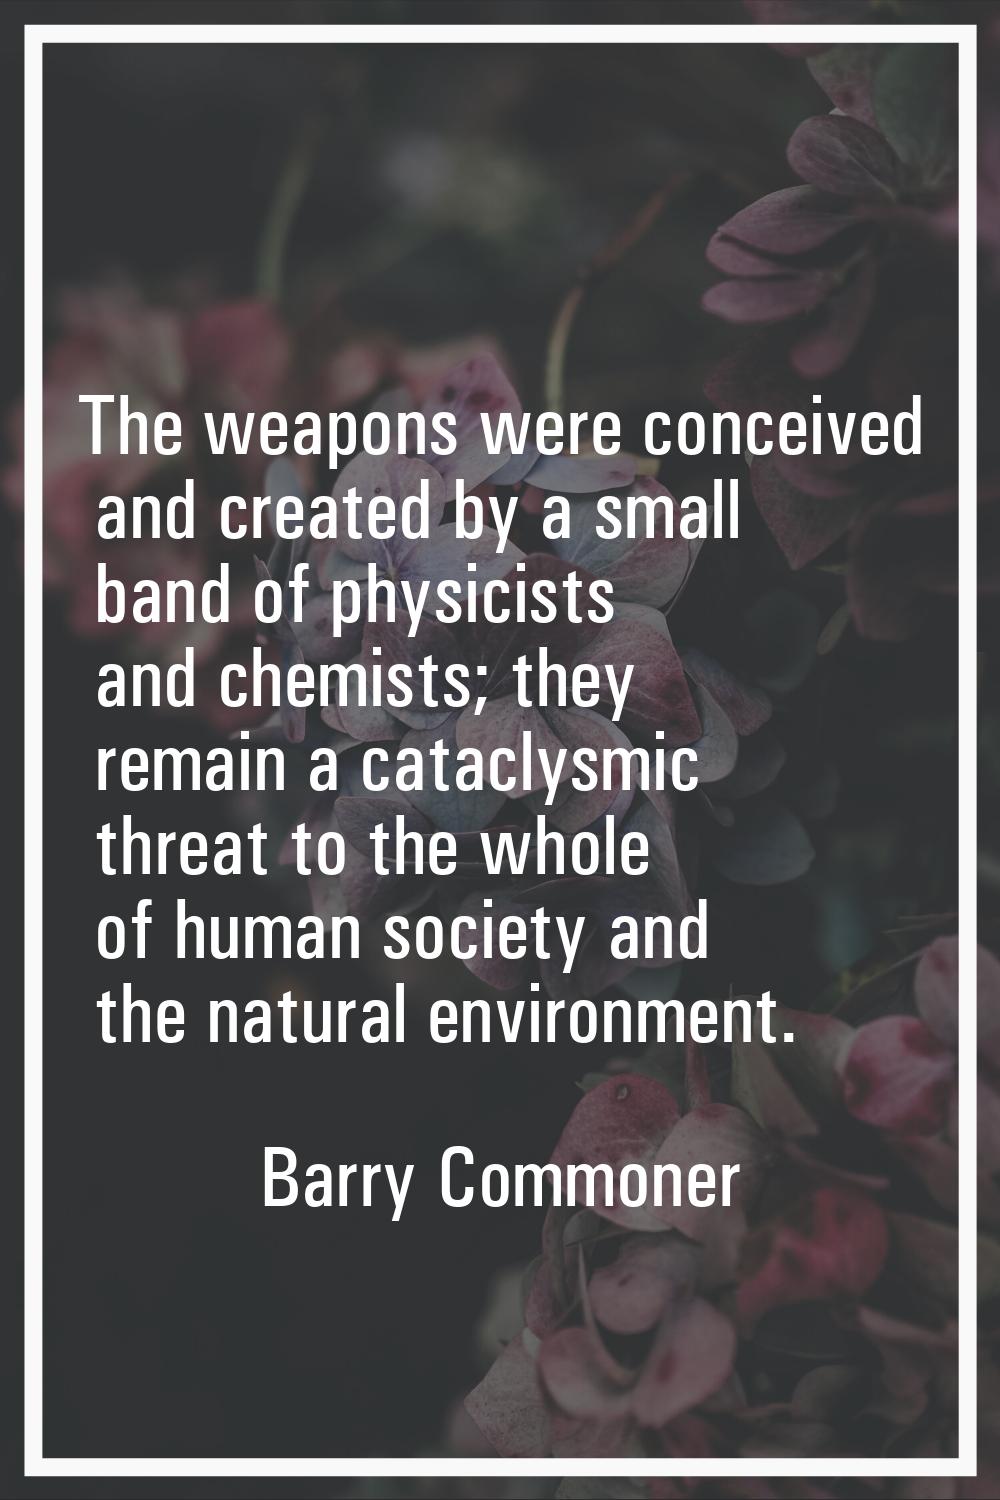 The weapons were conceived and created by a small band of physicists and chemists; they remain a ca